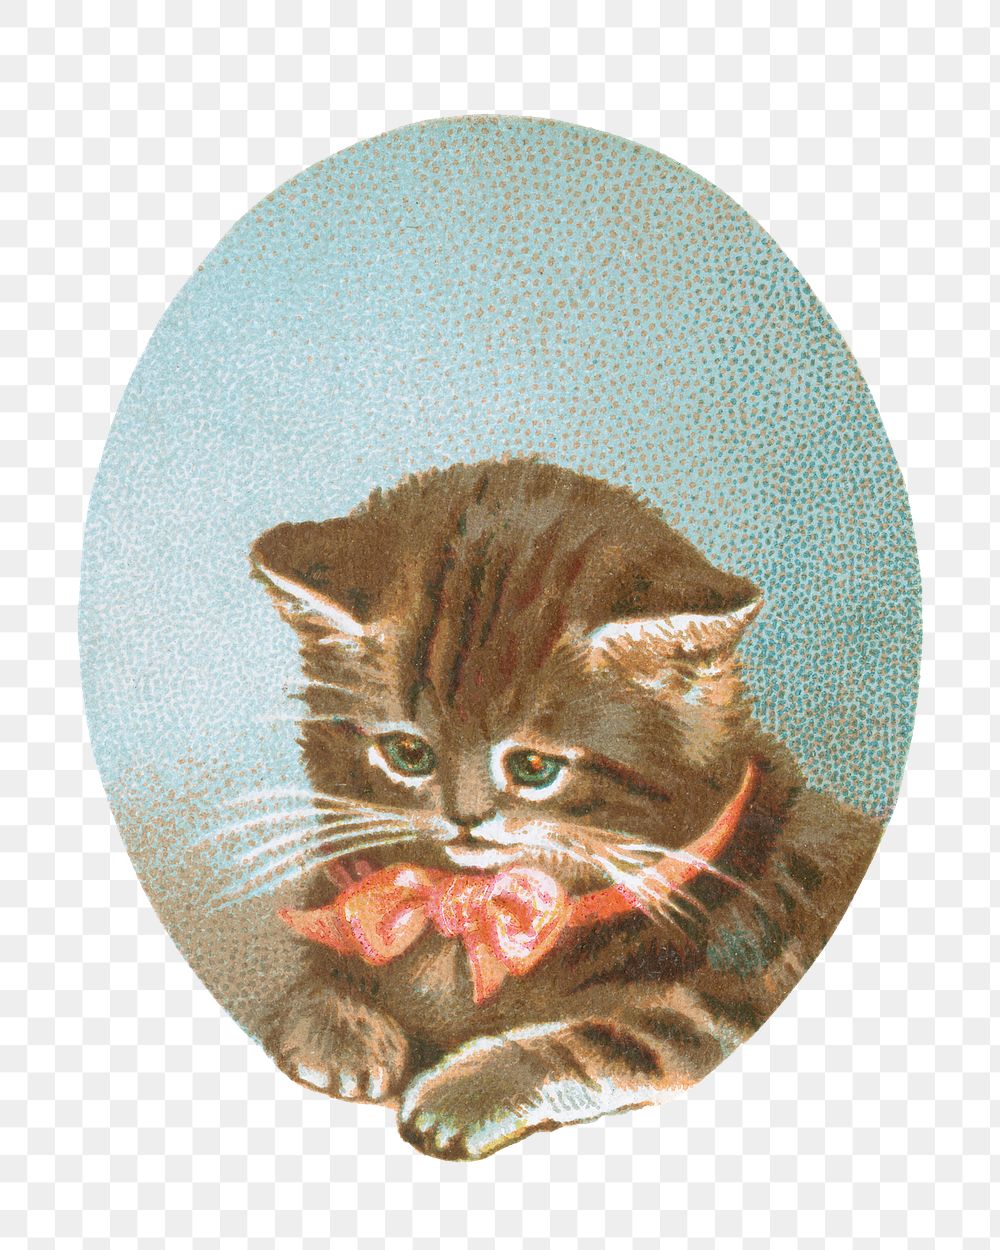 Cute little kitten png, vintage cat illustration, transparent background. Remixed by rawpixel.